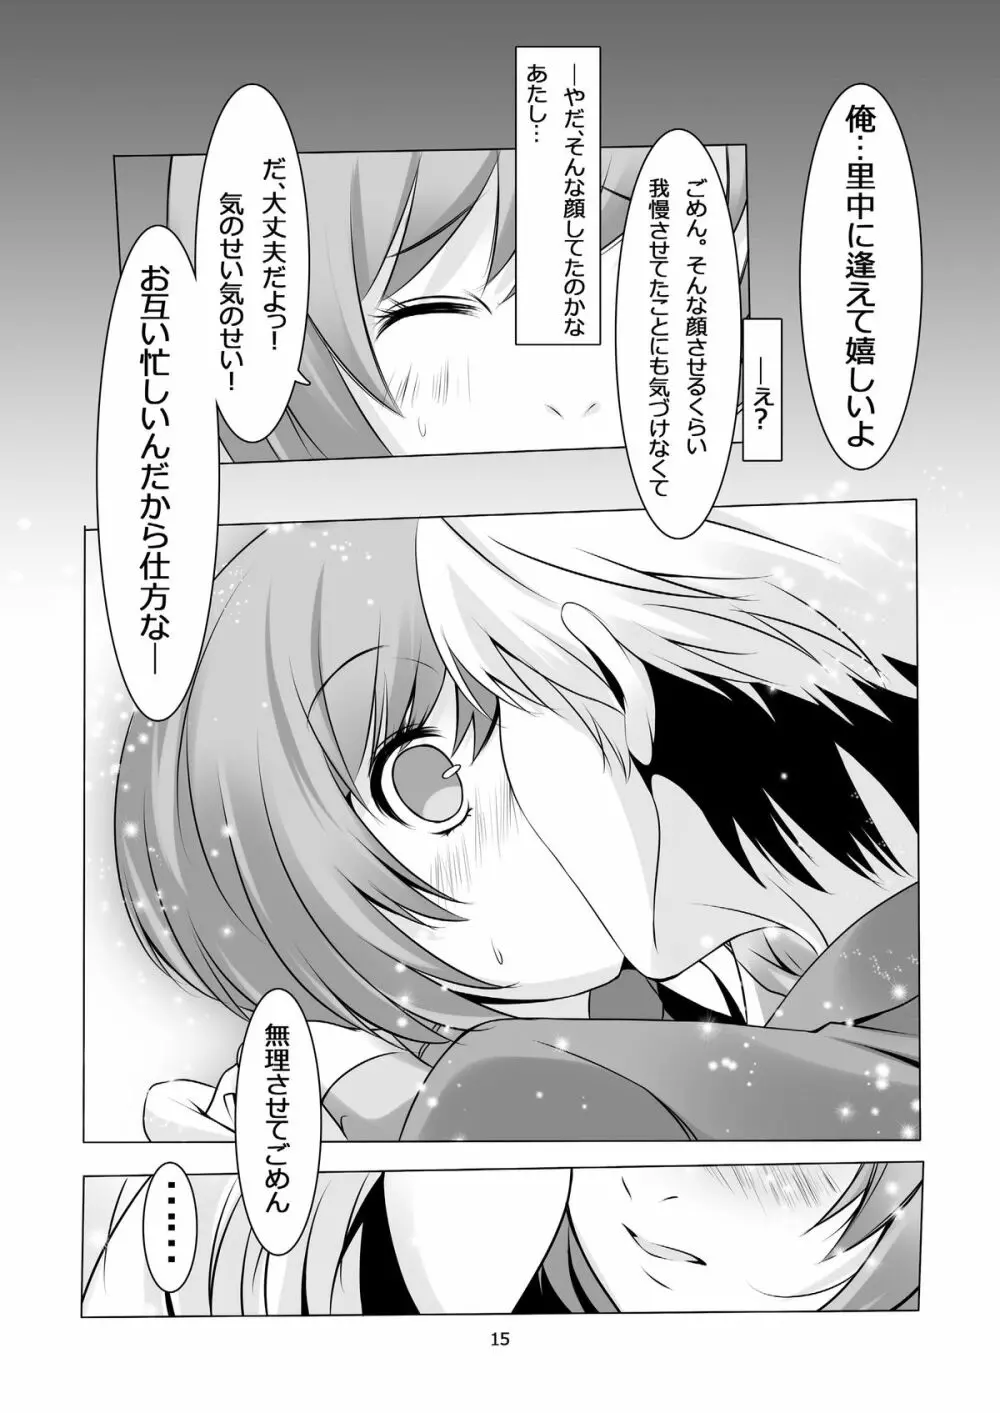 Persona 4: The Doujin #2 Page.17